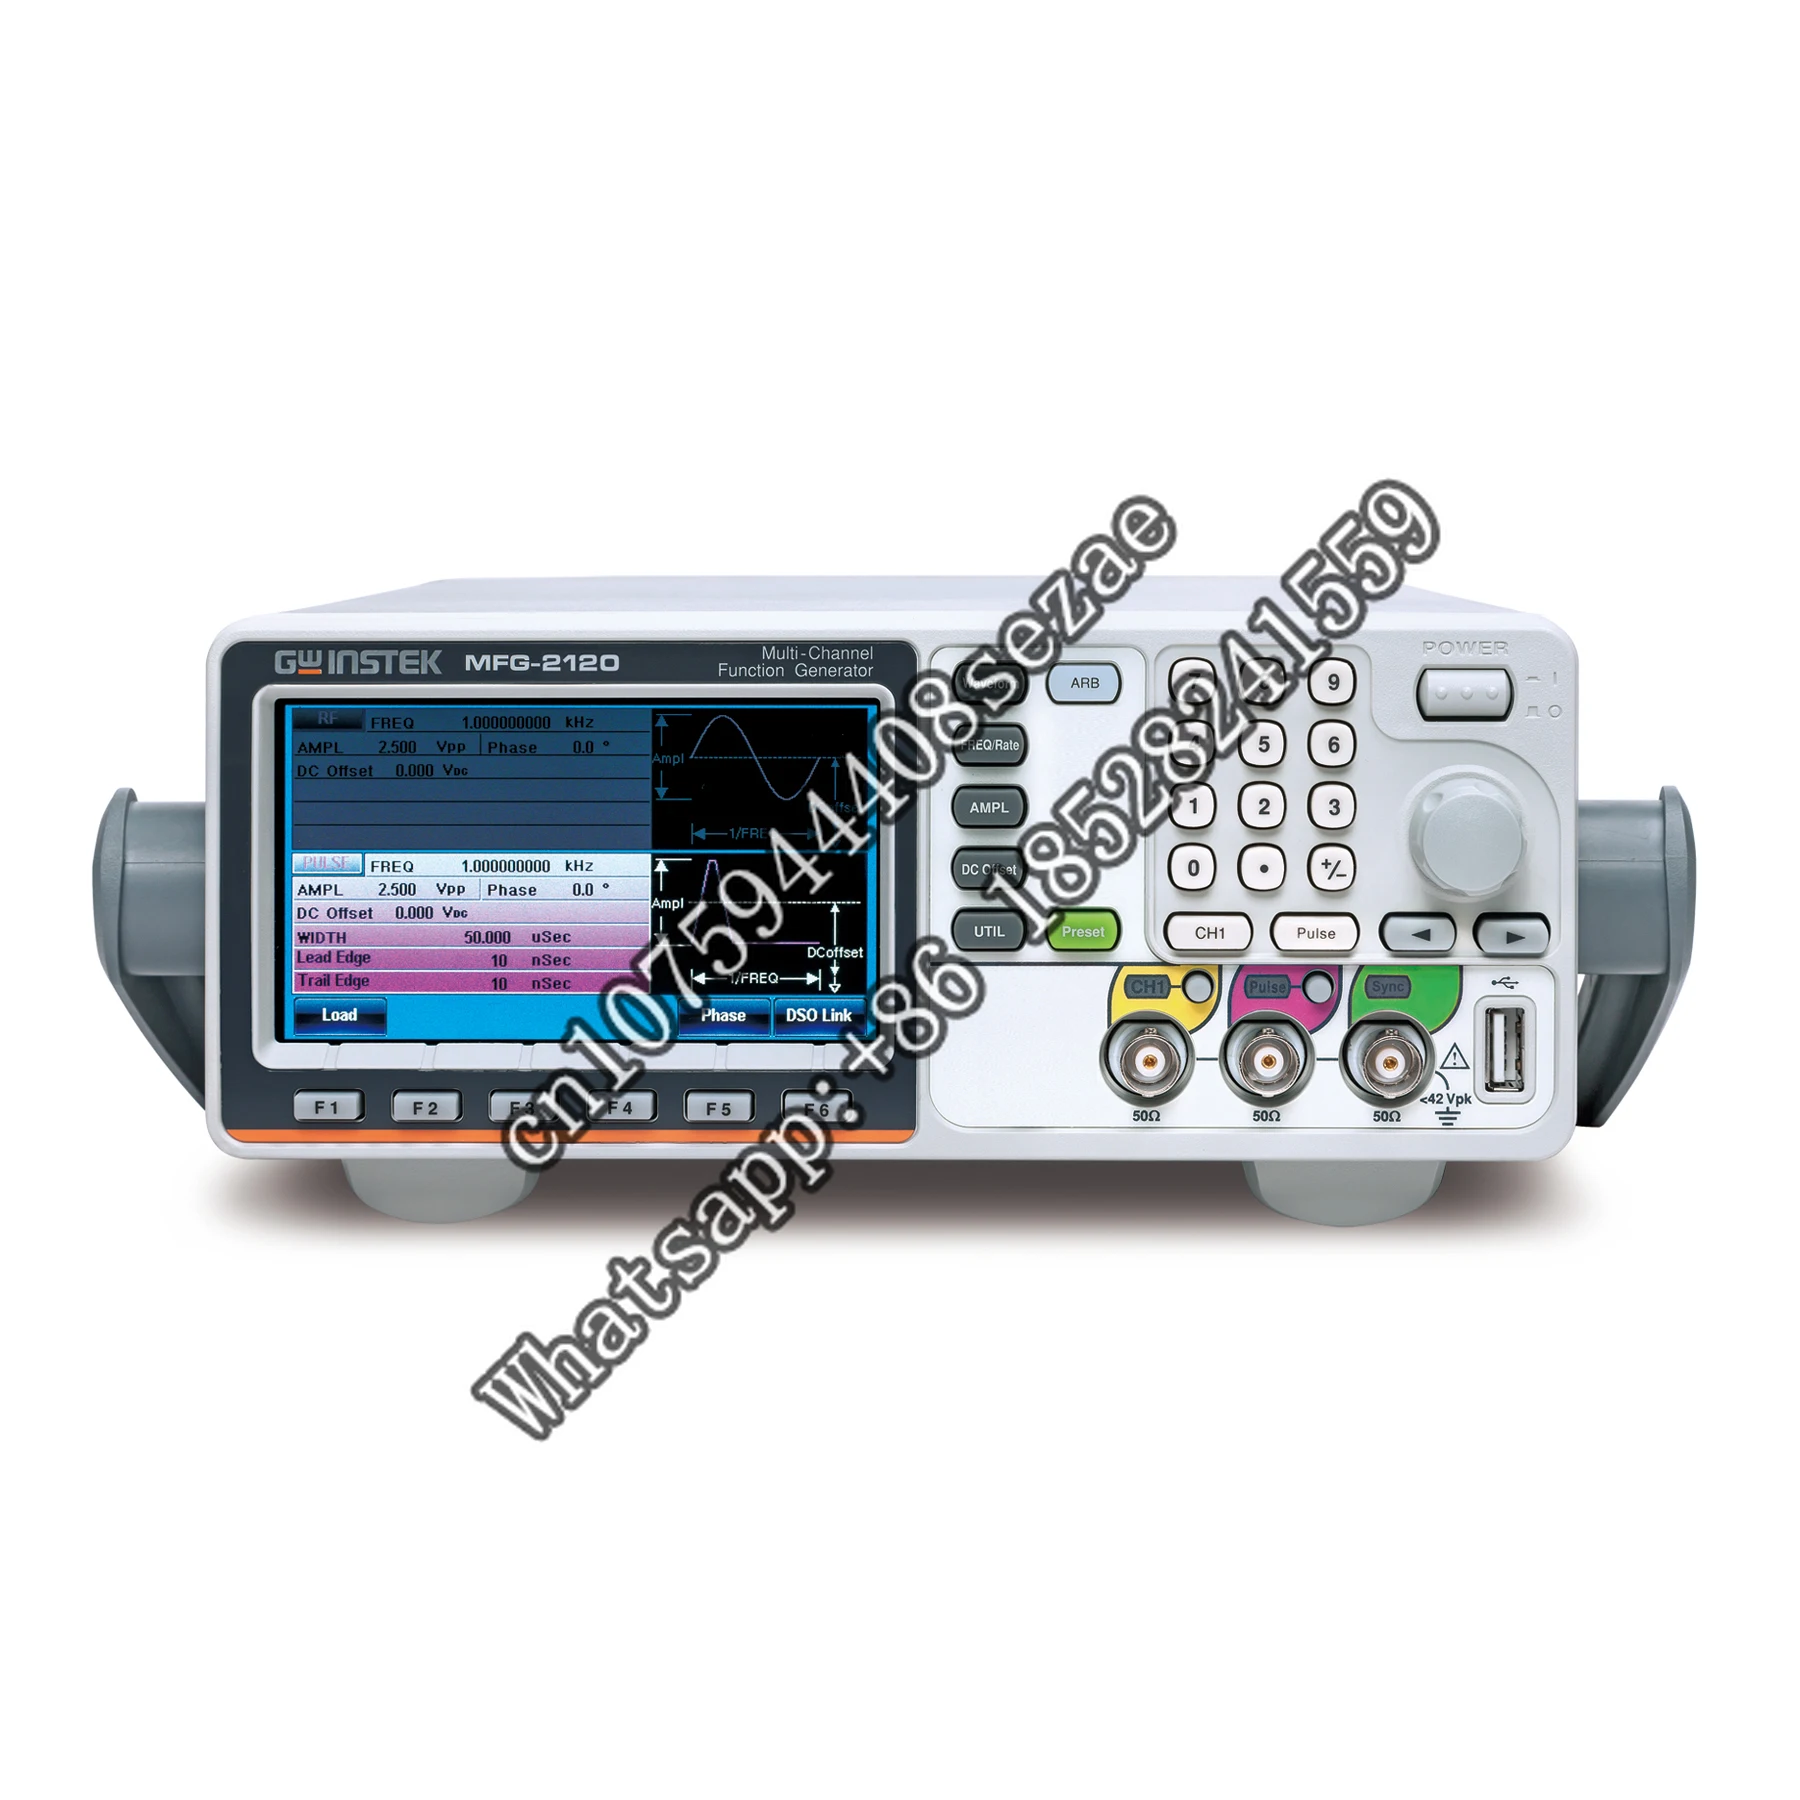 

MFG-2120 arbitrary waveform generator, output frequency 20MHz, sampling rate up to 200MSa/s